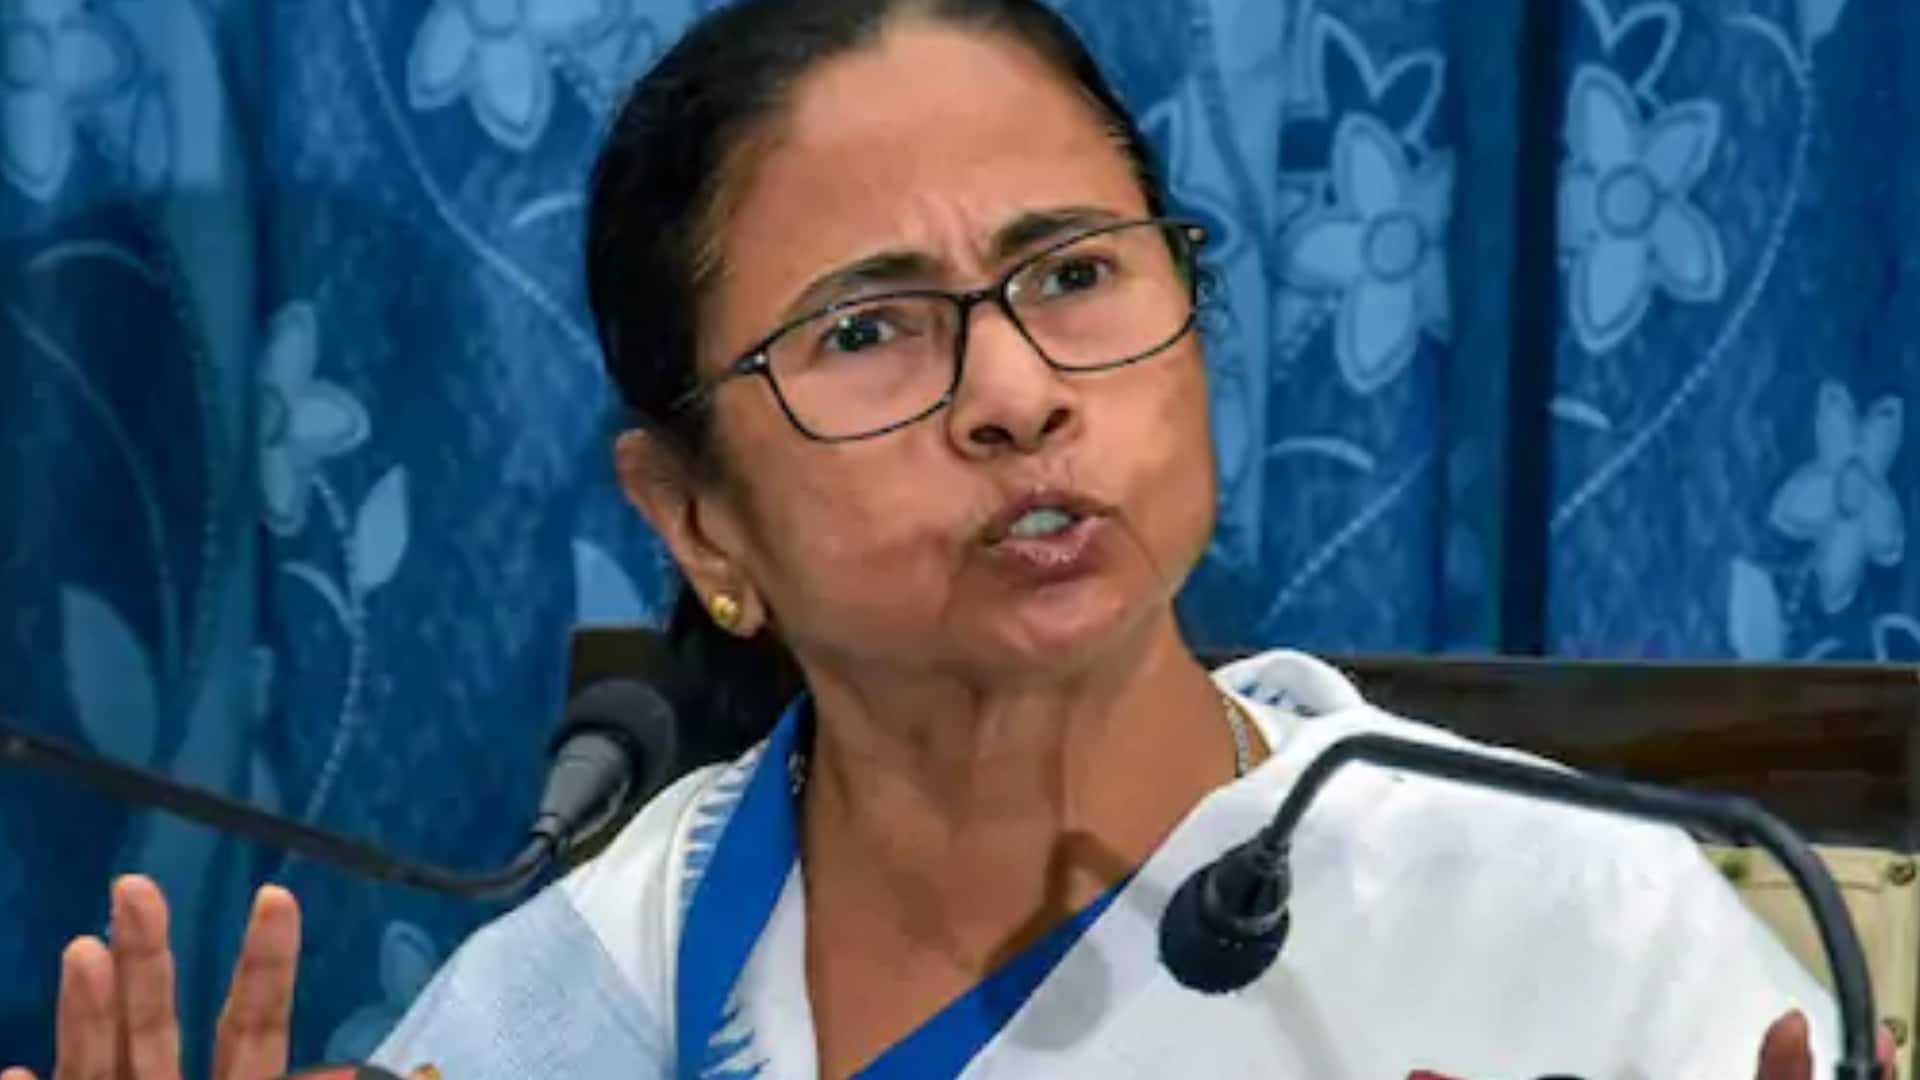 Those in Touch with Opposition Free to Leave TMC, Says Mamata Amid Turmoil over Suvendu Adhikari